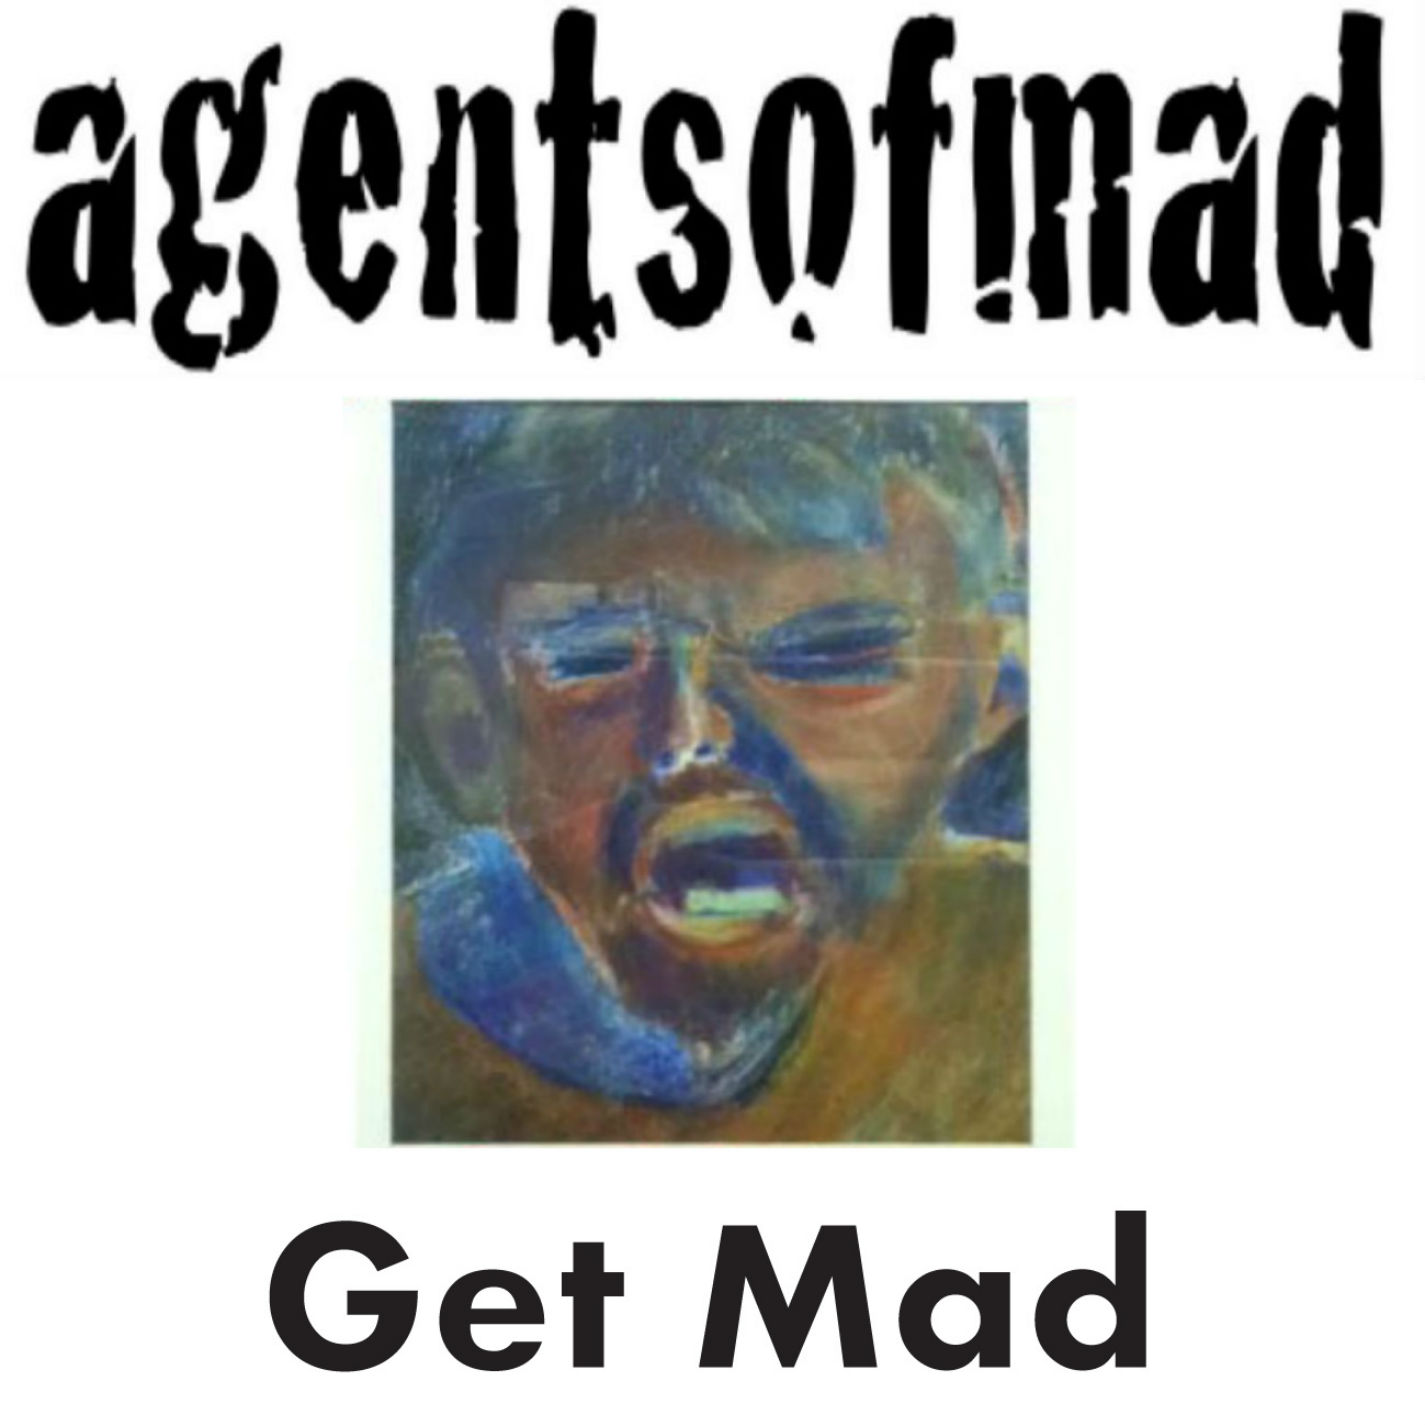 Image of an angry man screaming - band is agentsofmad and the cd title is "Get Mad"